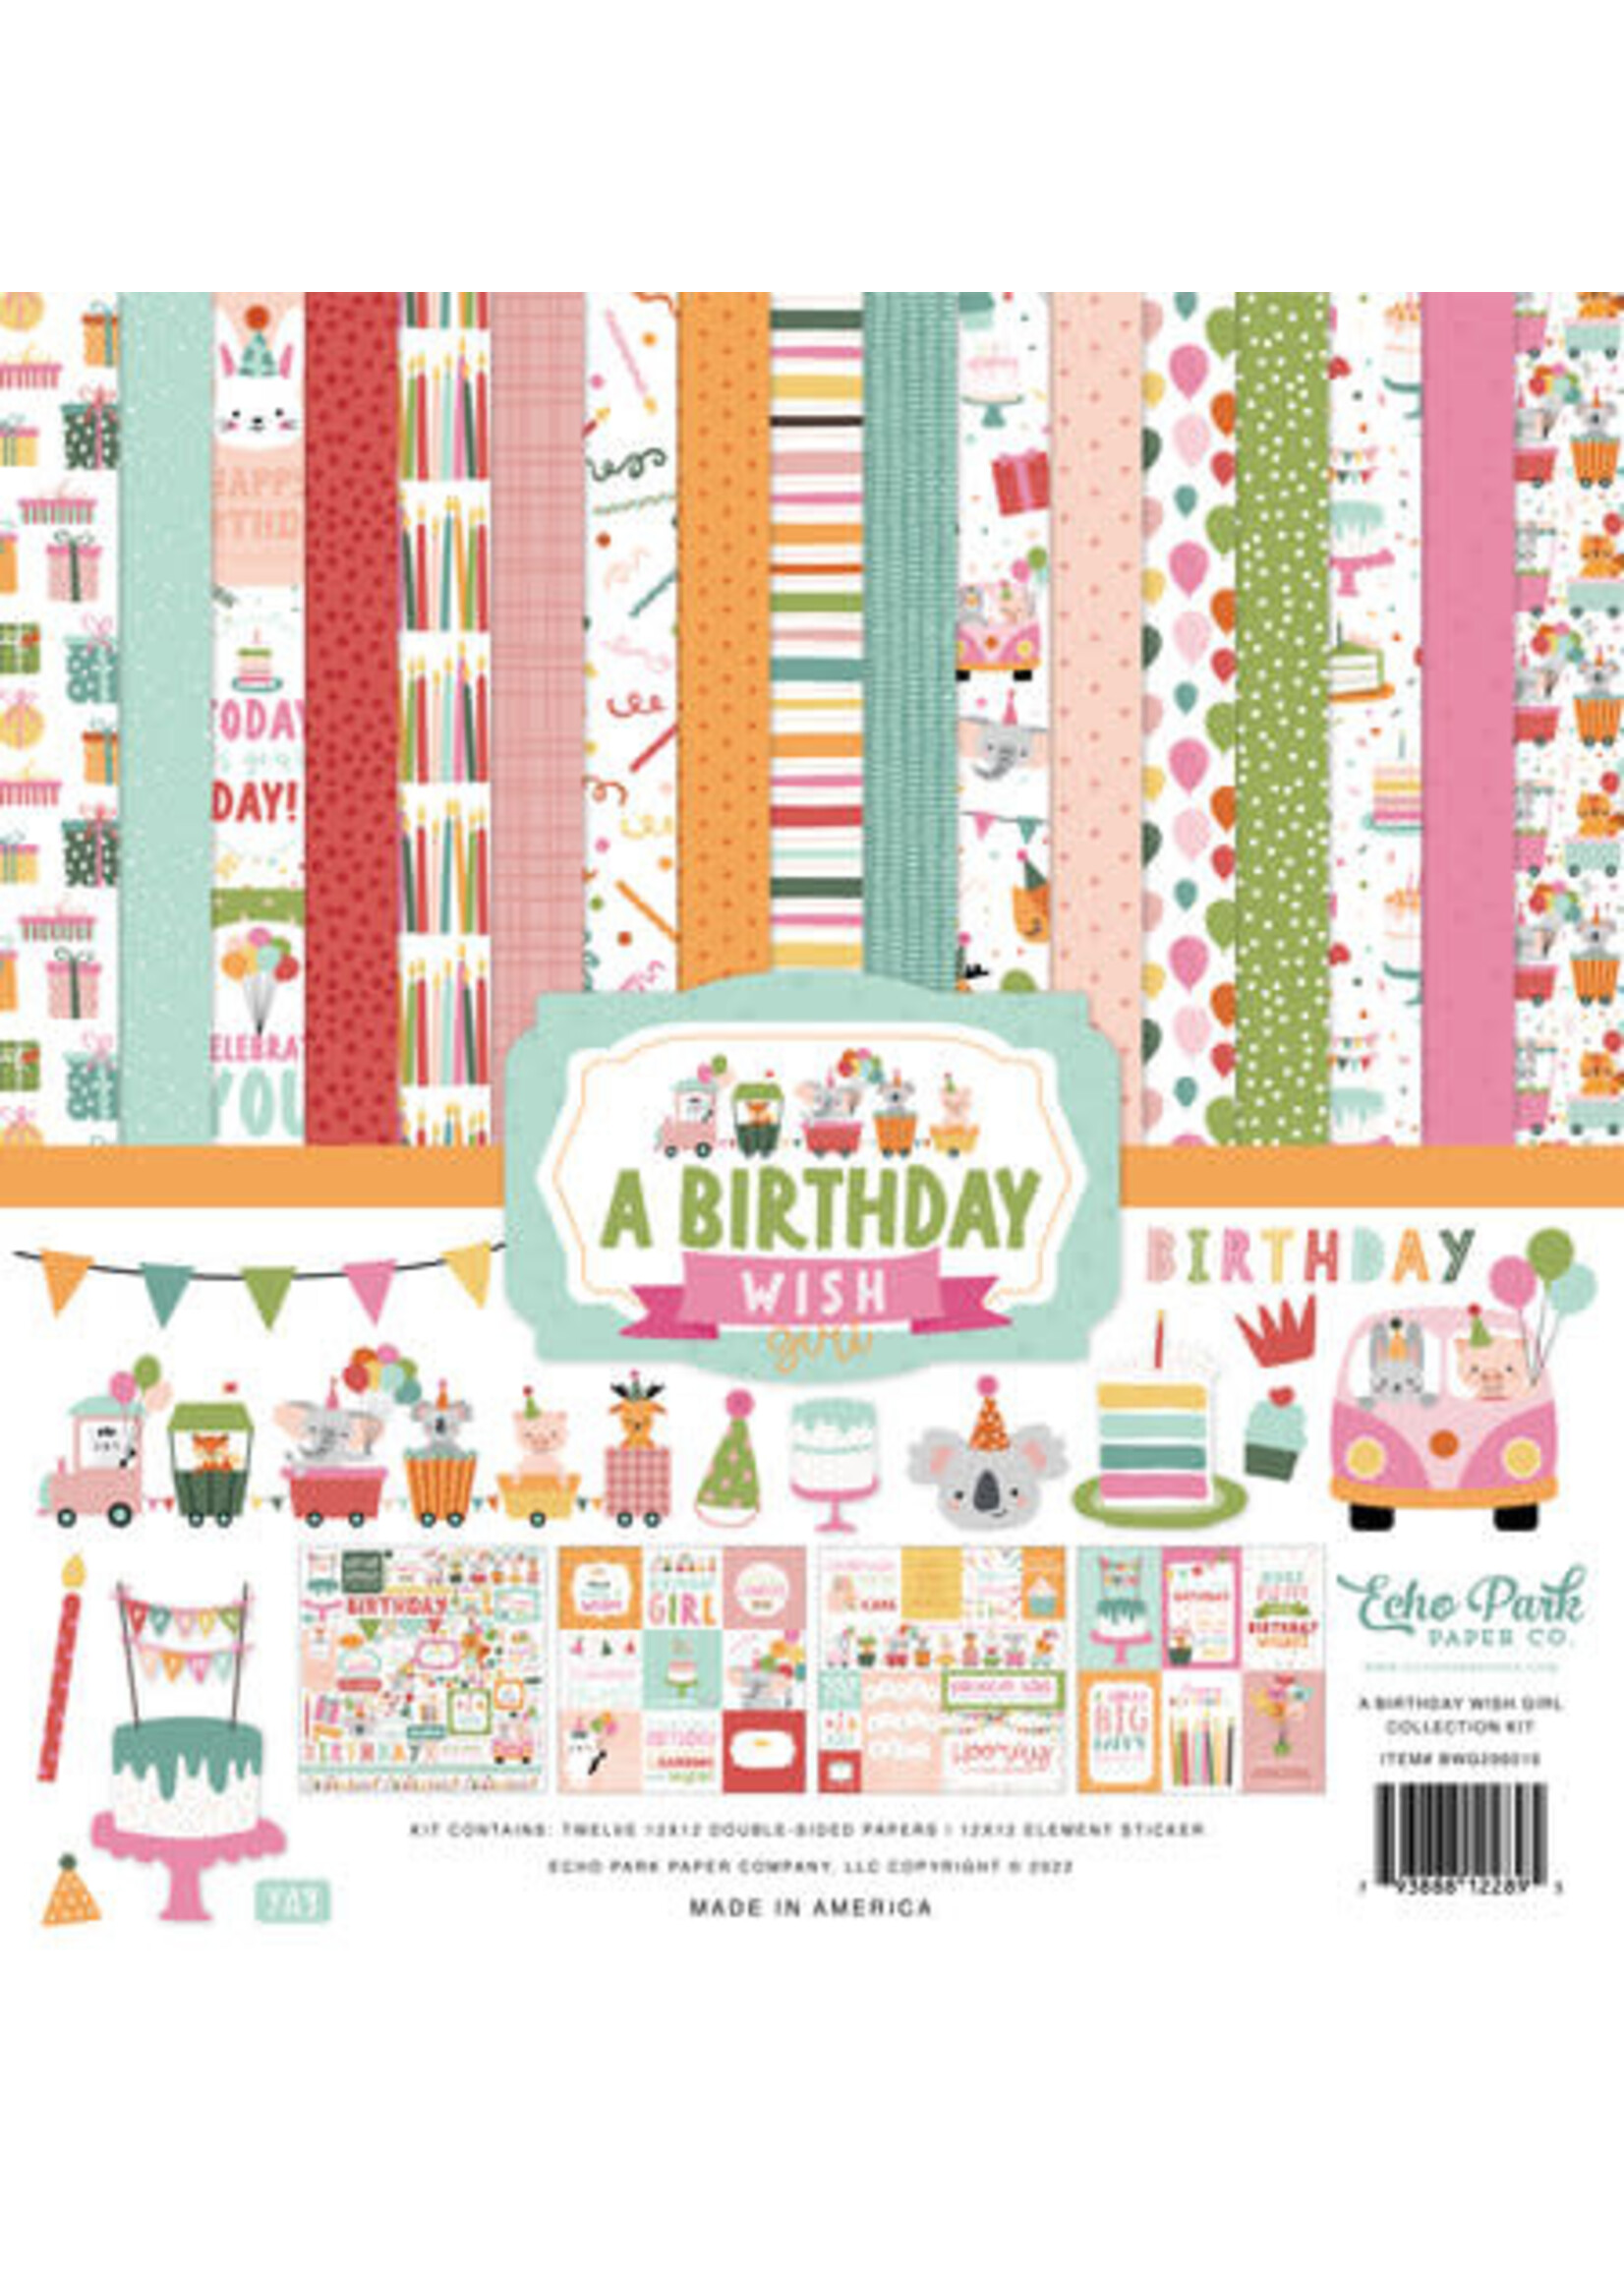 Echo Park A Birthday Wish Girl 12x12 Inch Collection Kit (BWG296016)